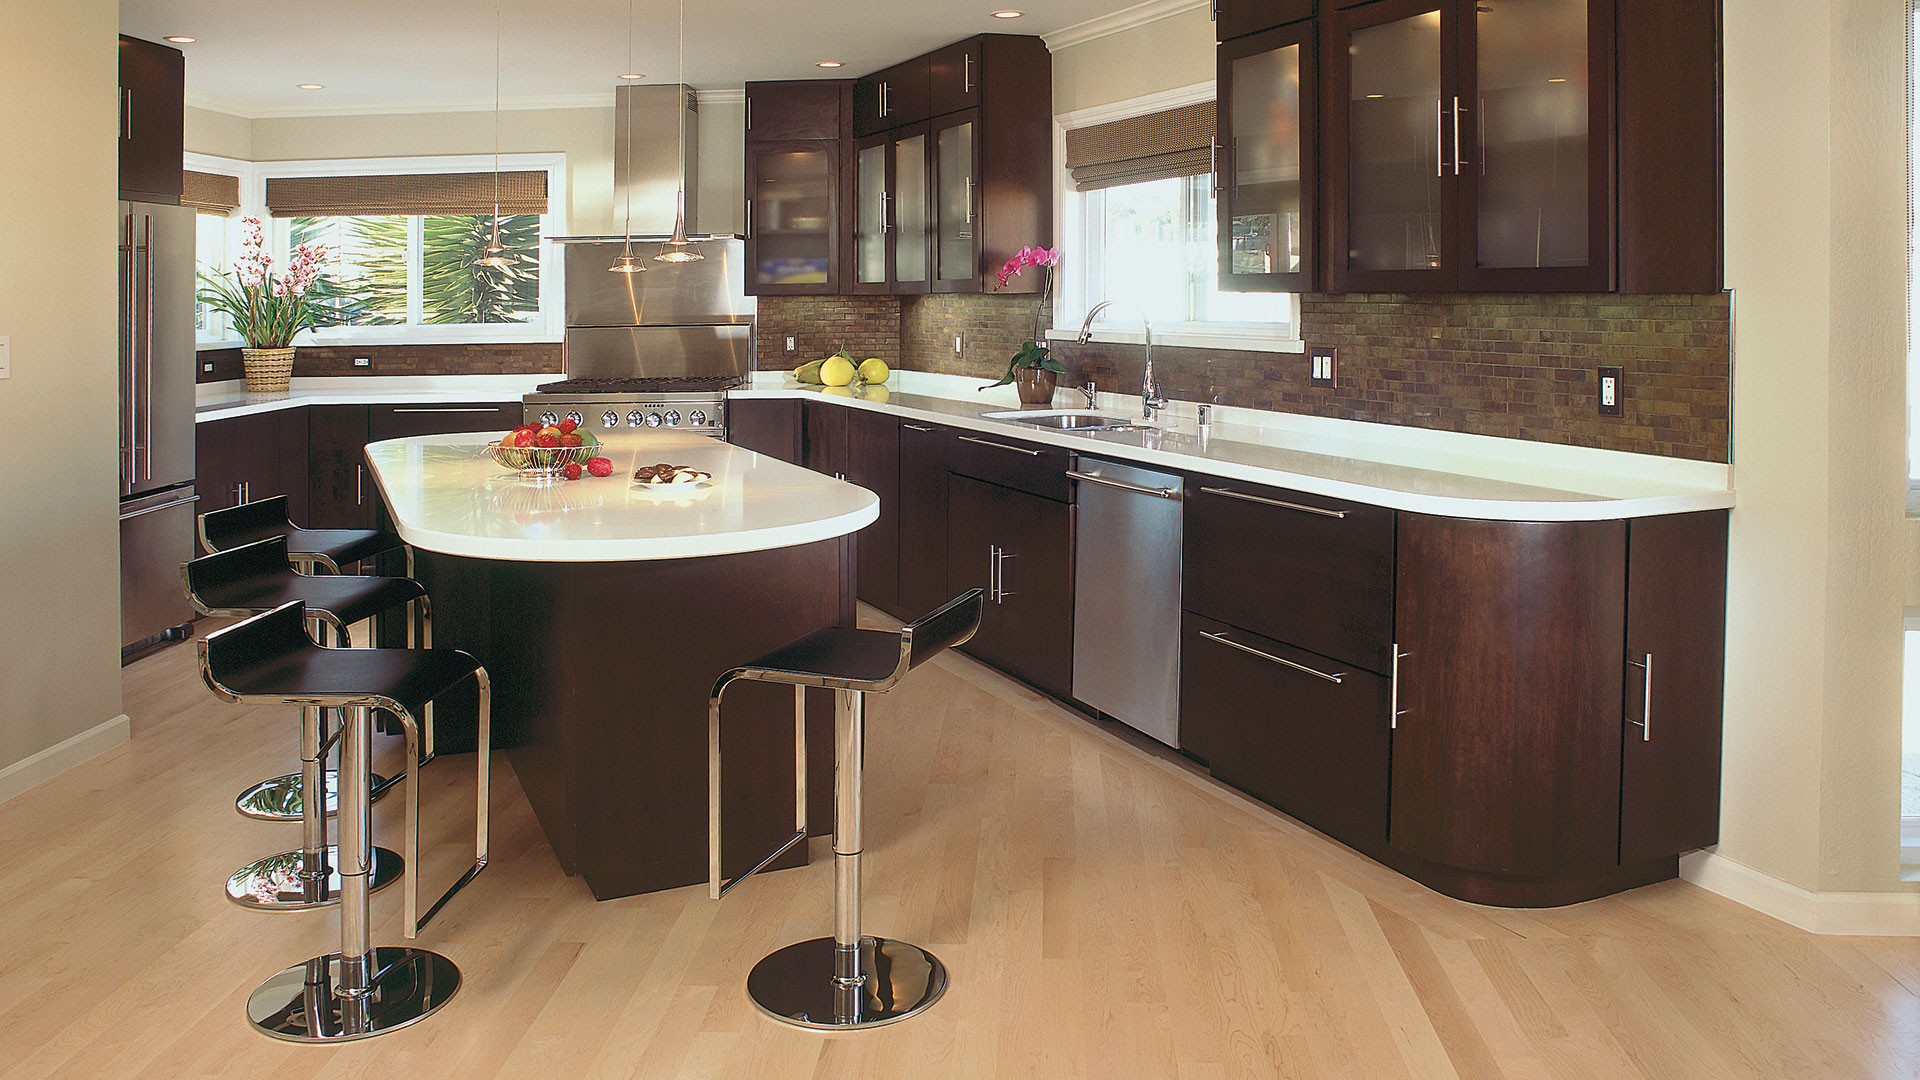 Contemporary Cherry Kitchen Cabinets In Truffle Finish